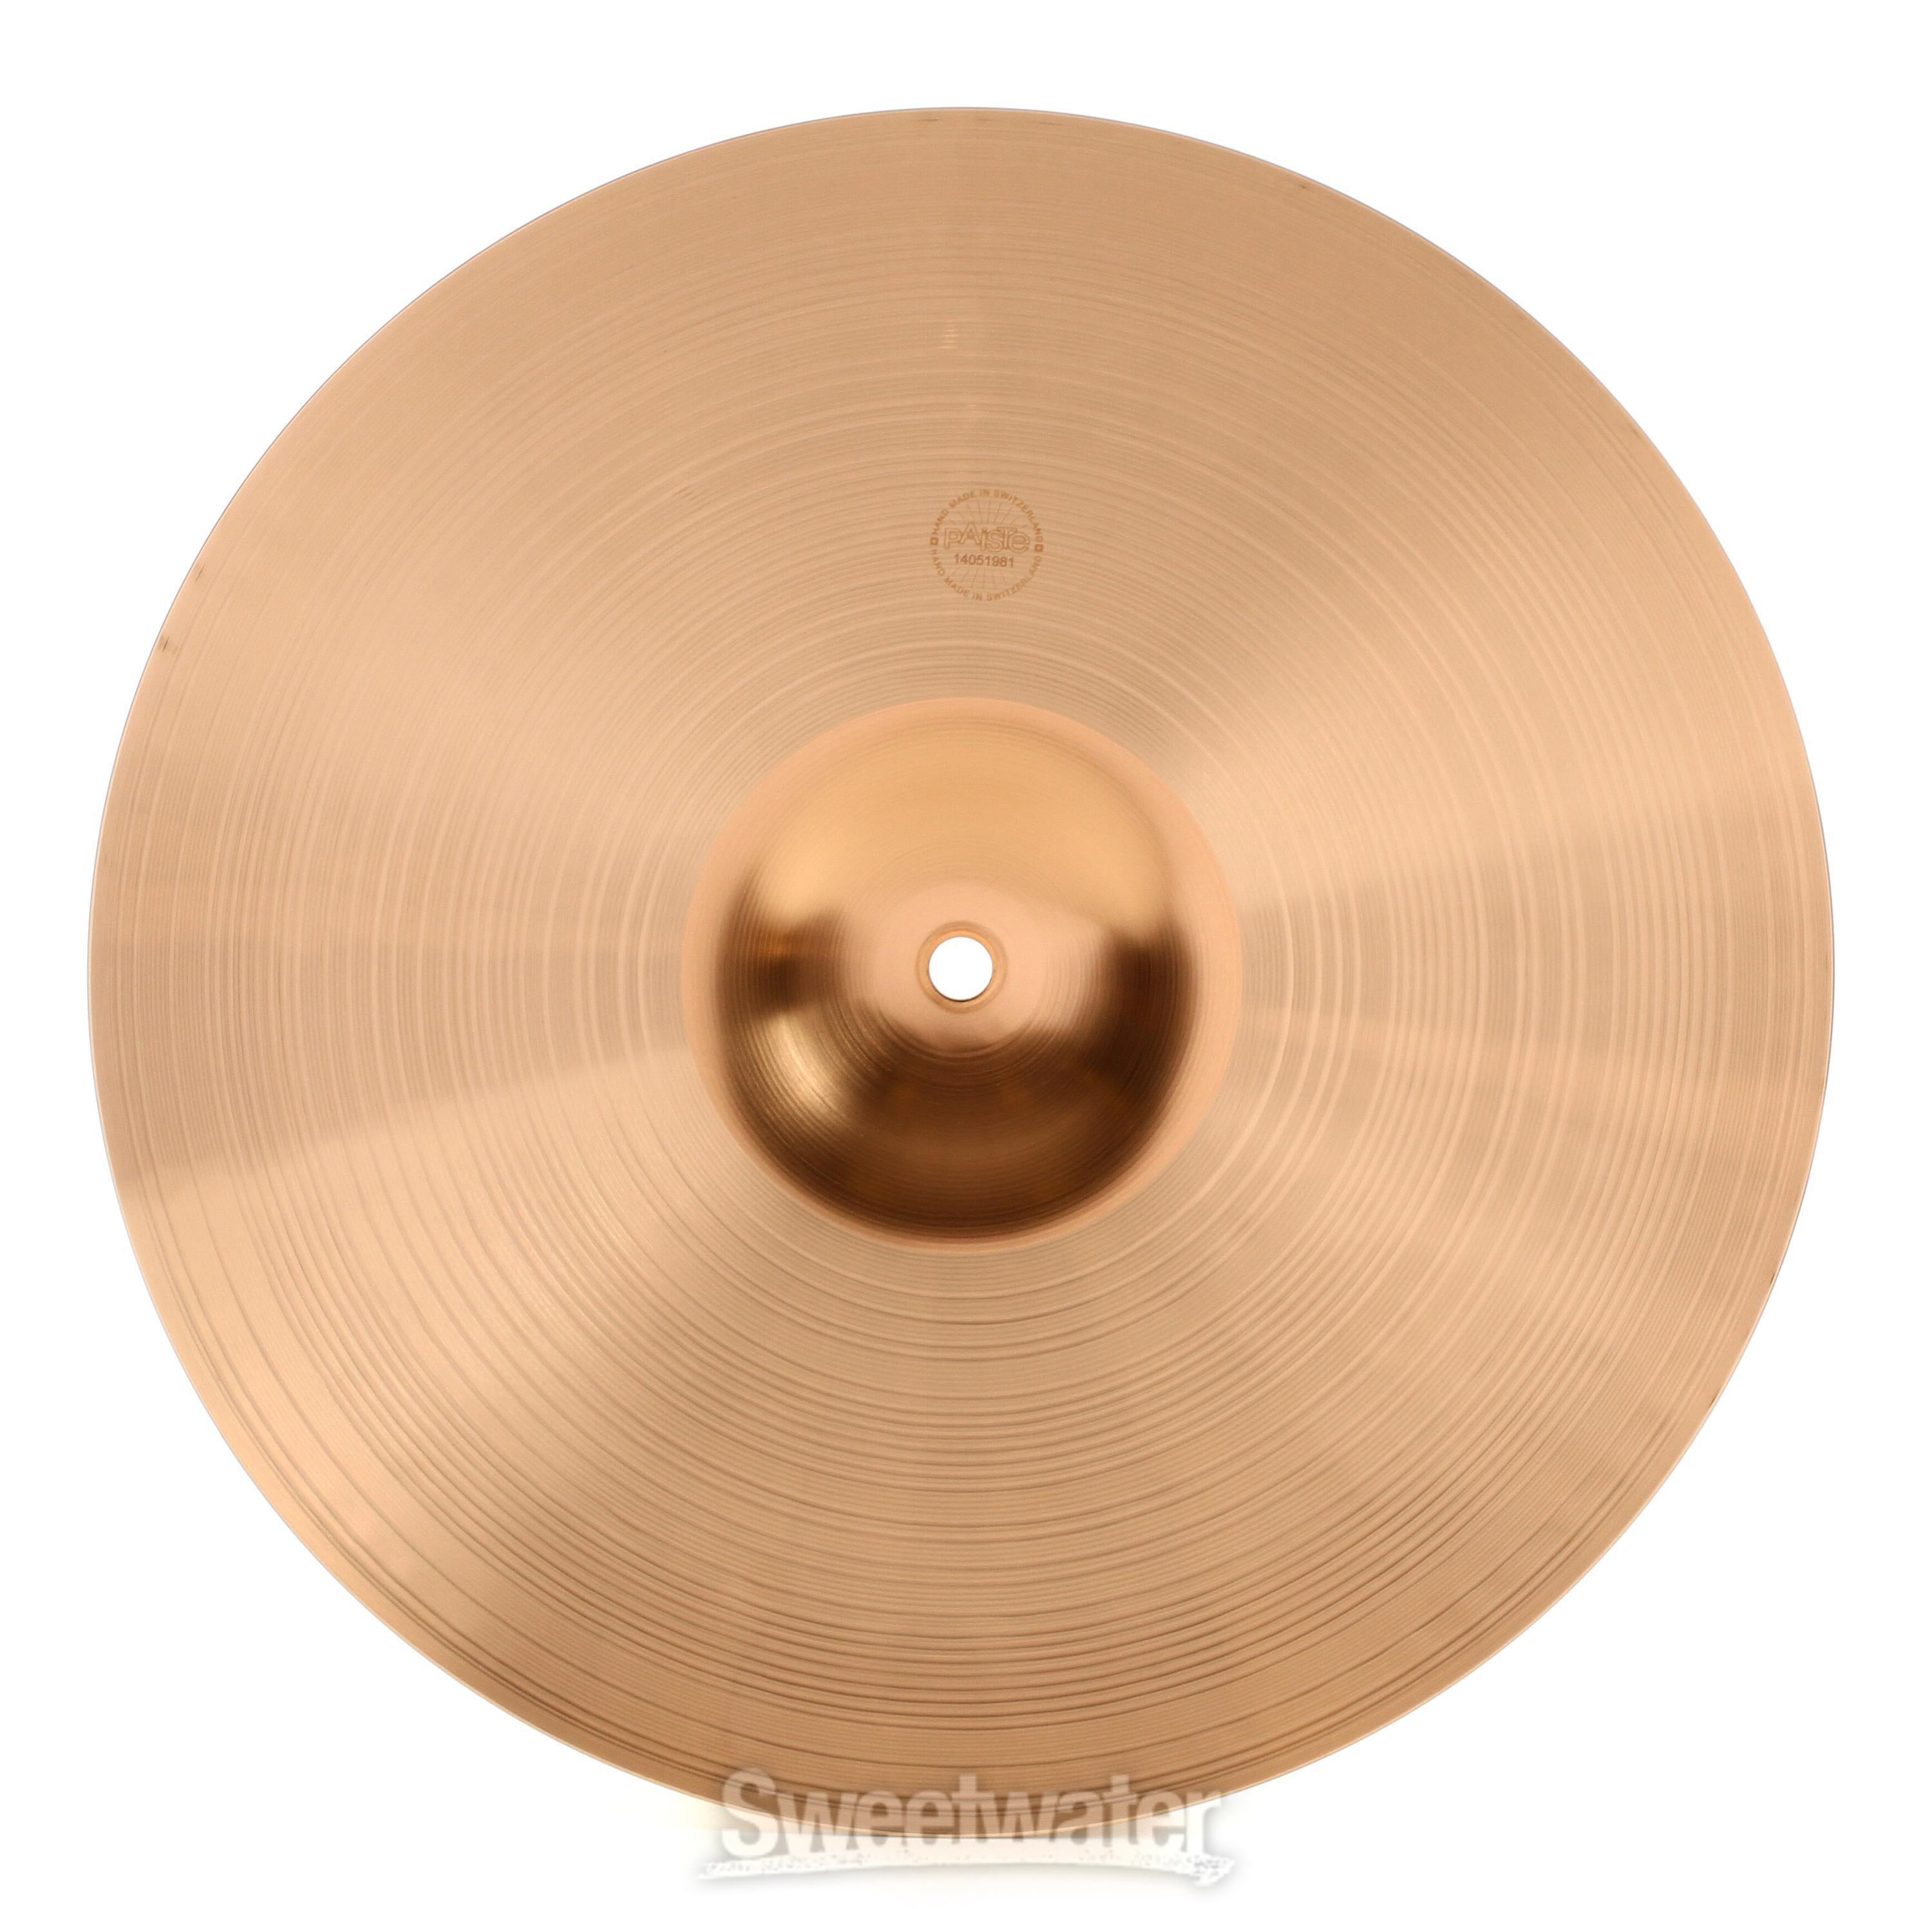 Paiste 14 inch PST 7 Heavy Hi-hat Cymbals | Sweetwater